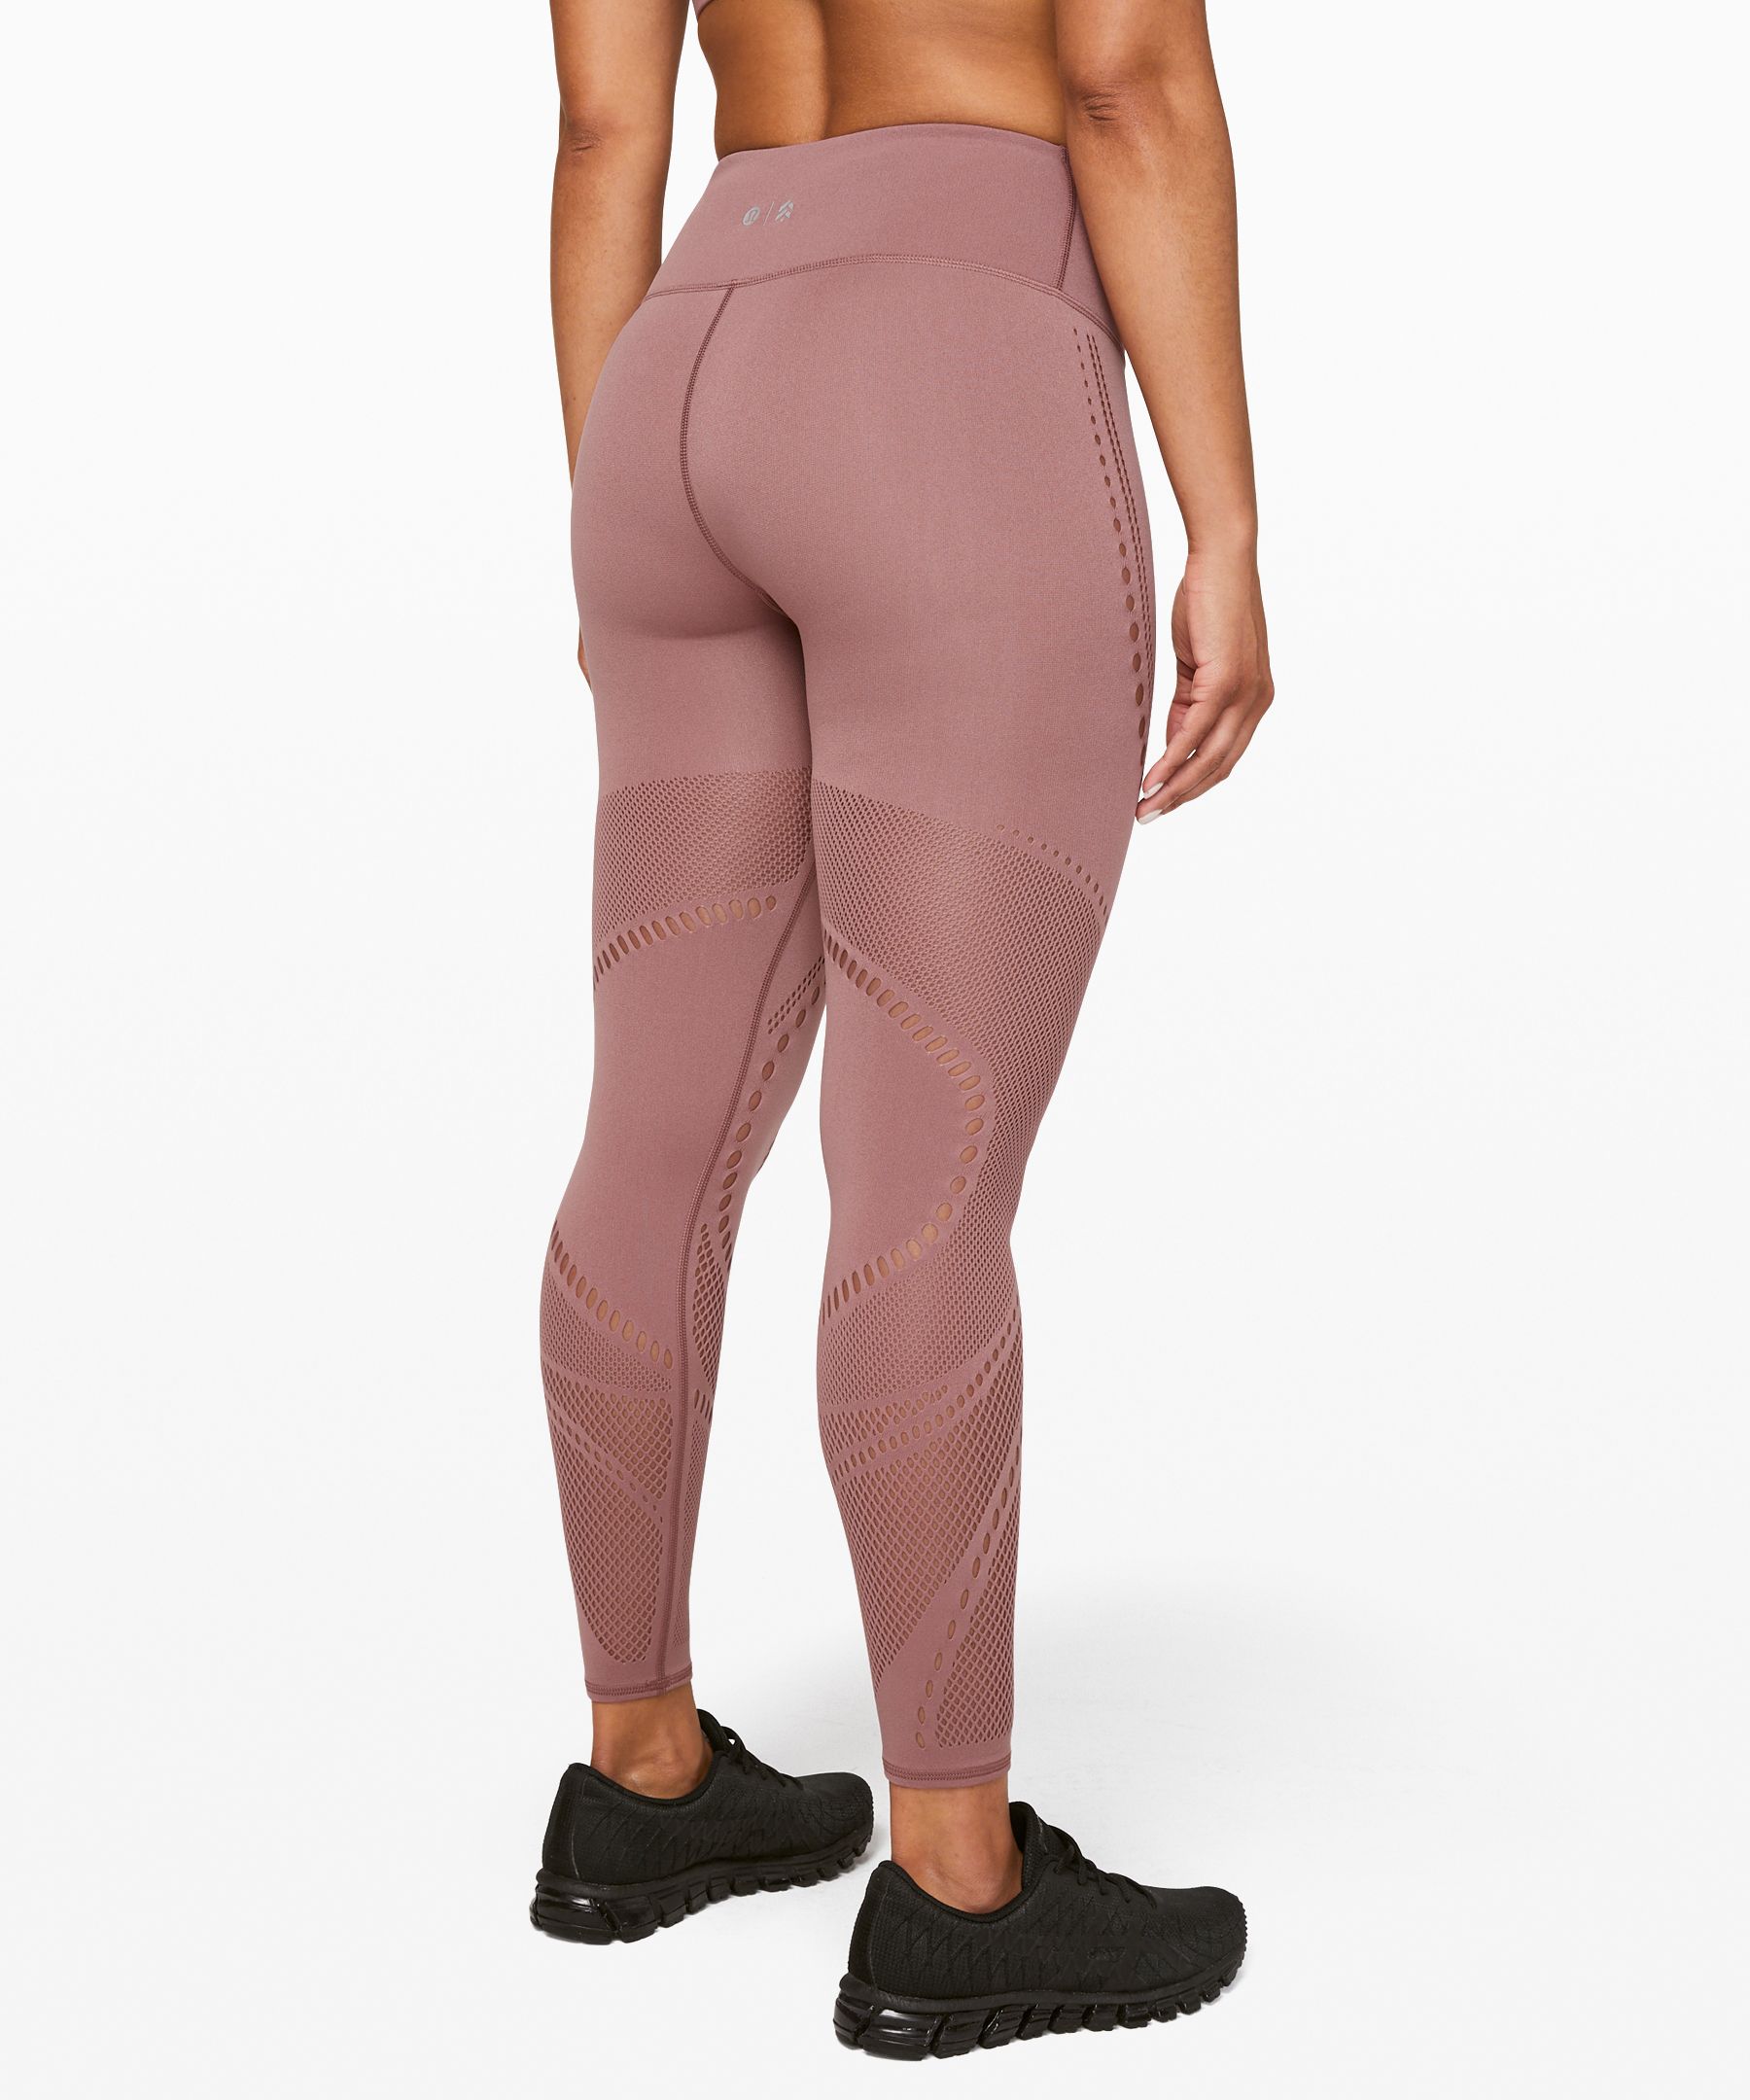 Where Are Lululemon Leggings Manufactured 2  International Society of  Precision Agriculture